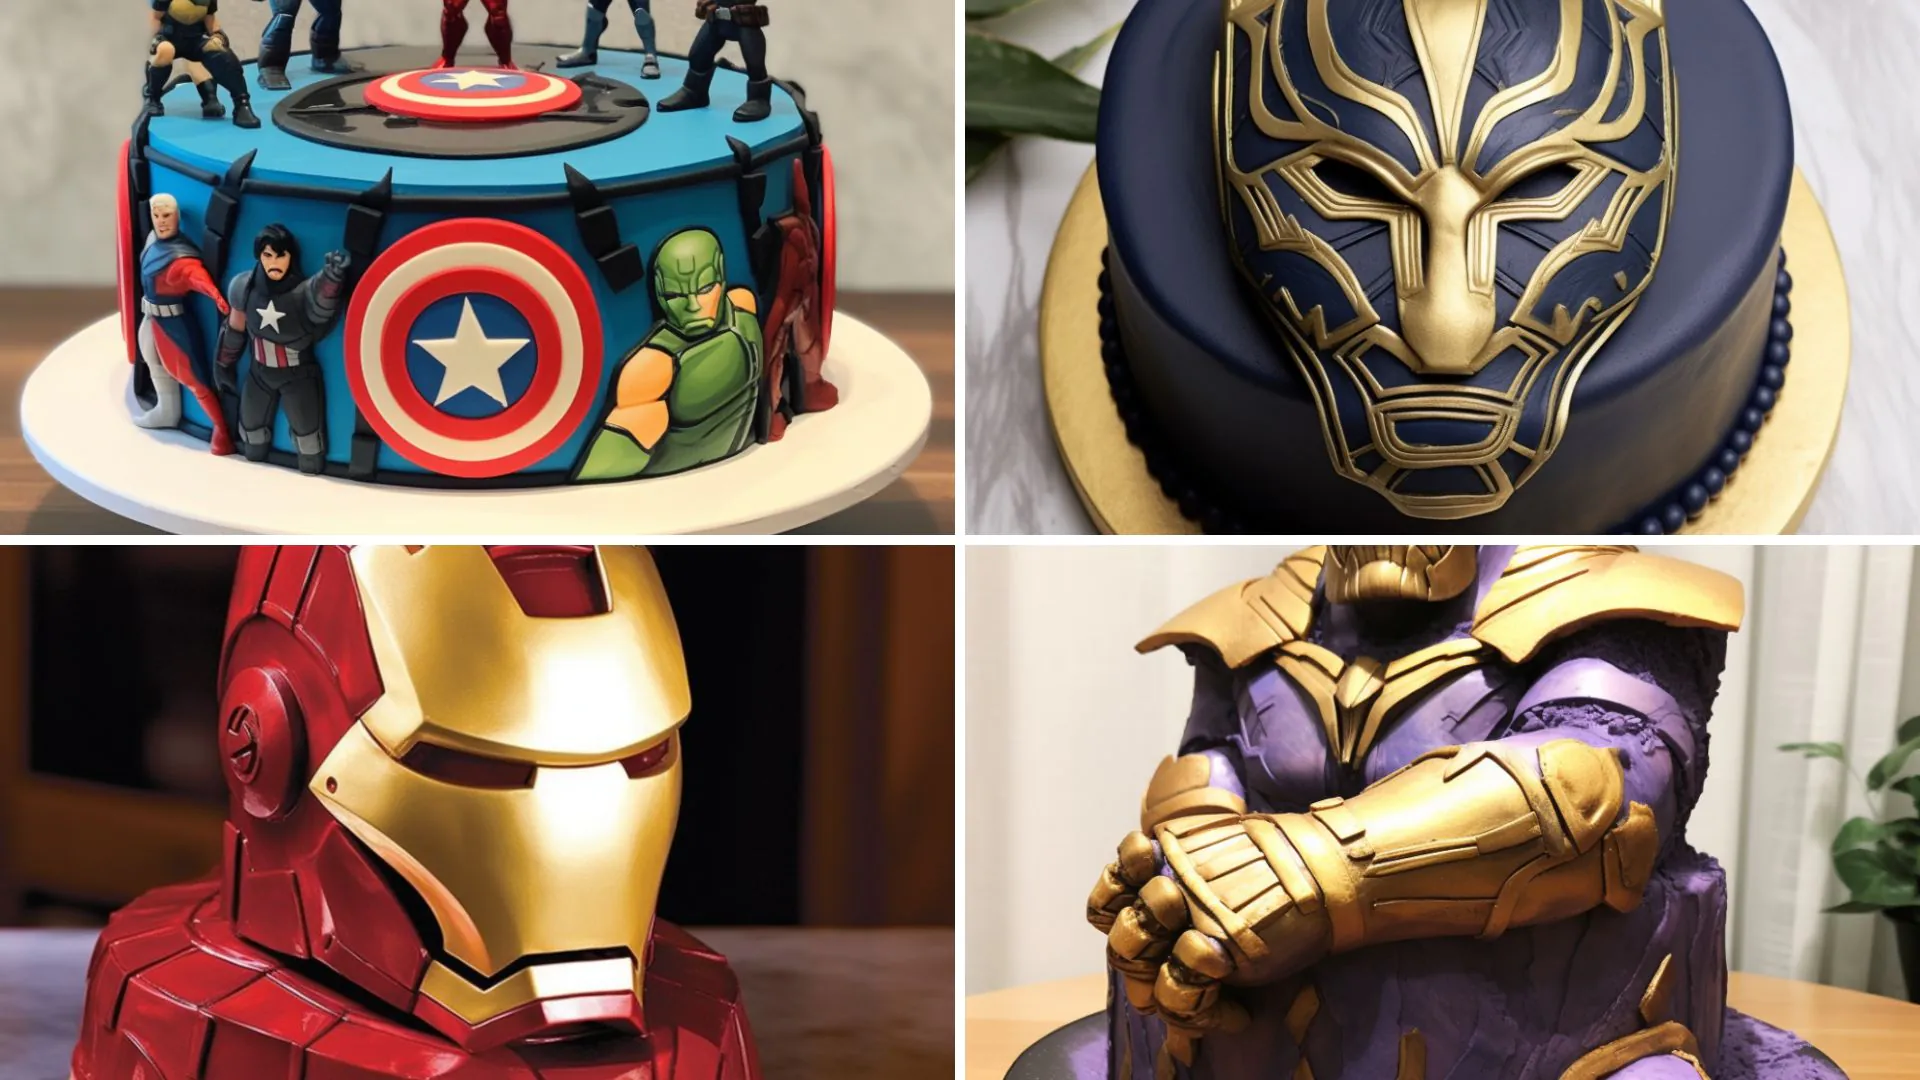 Avengers Photo Cake in 1kg | Cook with Kousy - YouTube